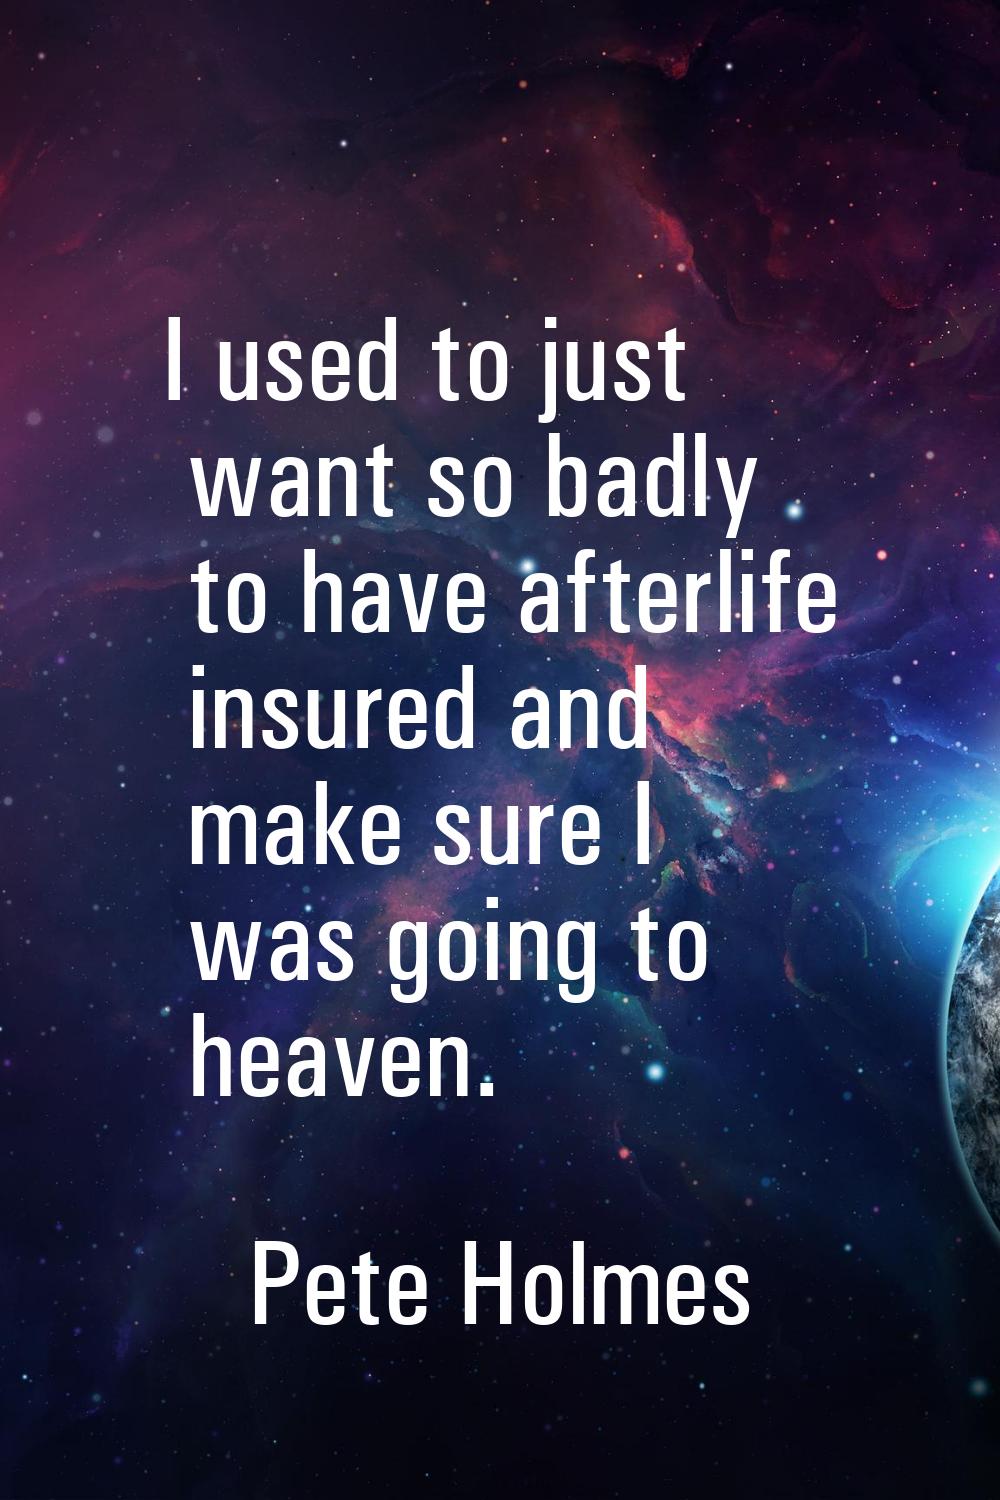 I used to just want so badly to have afterlife insured and make sure I was going to heaven.